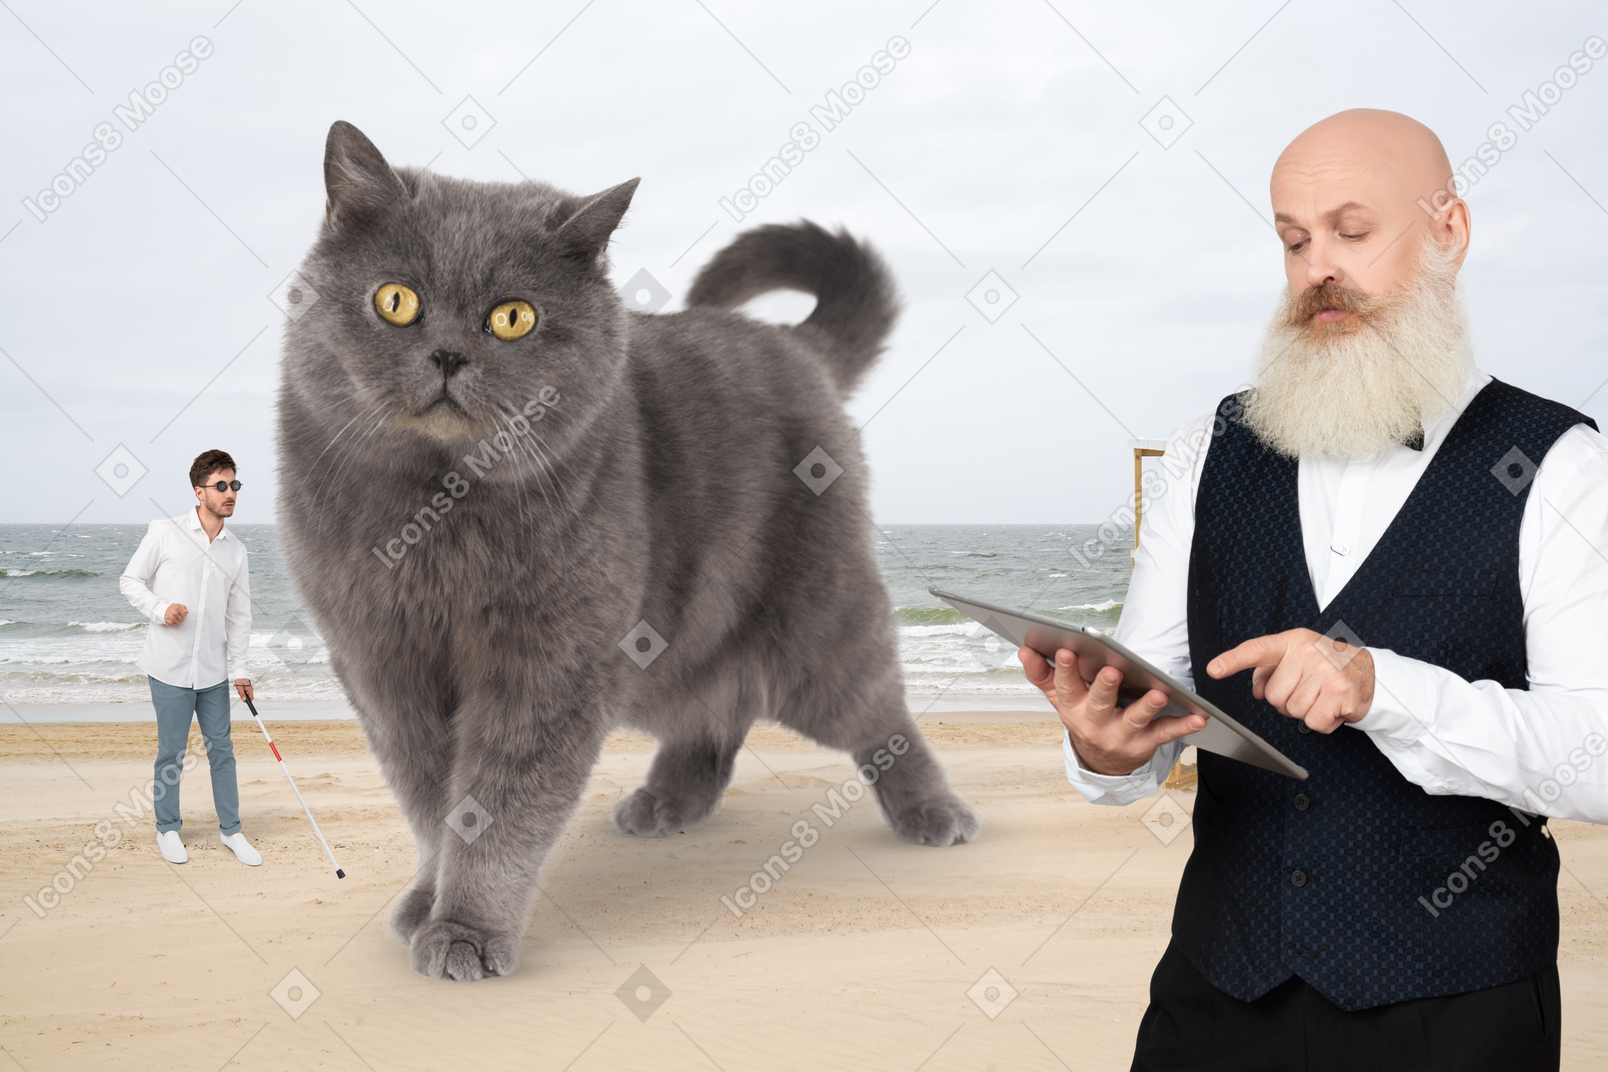 Business man with a cat